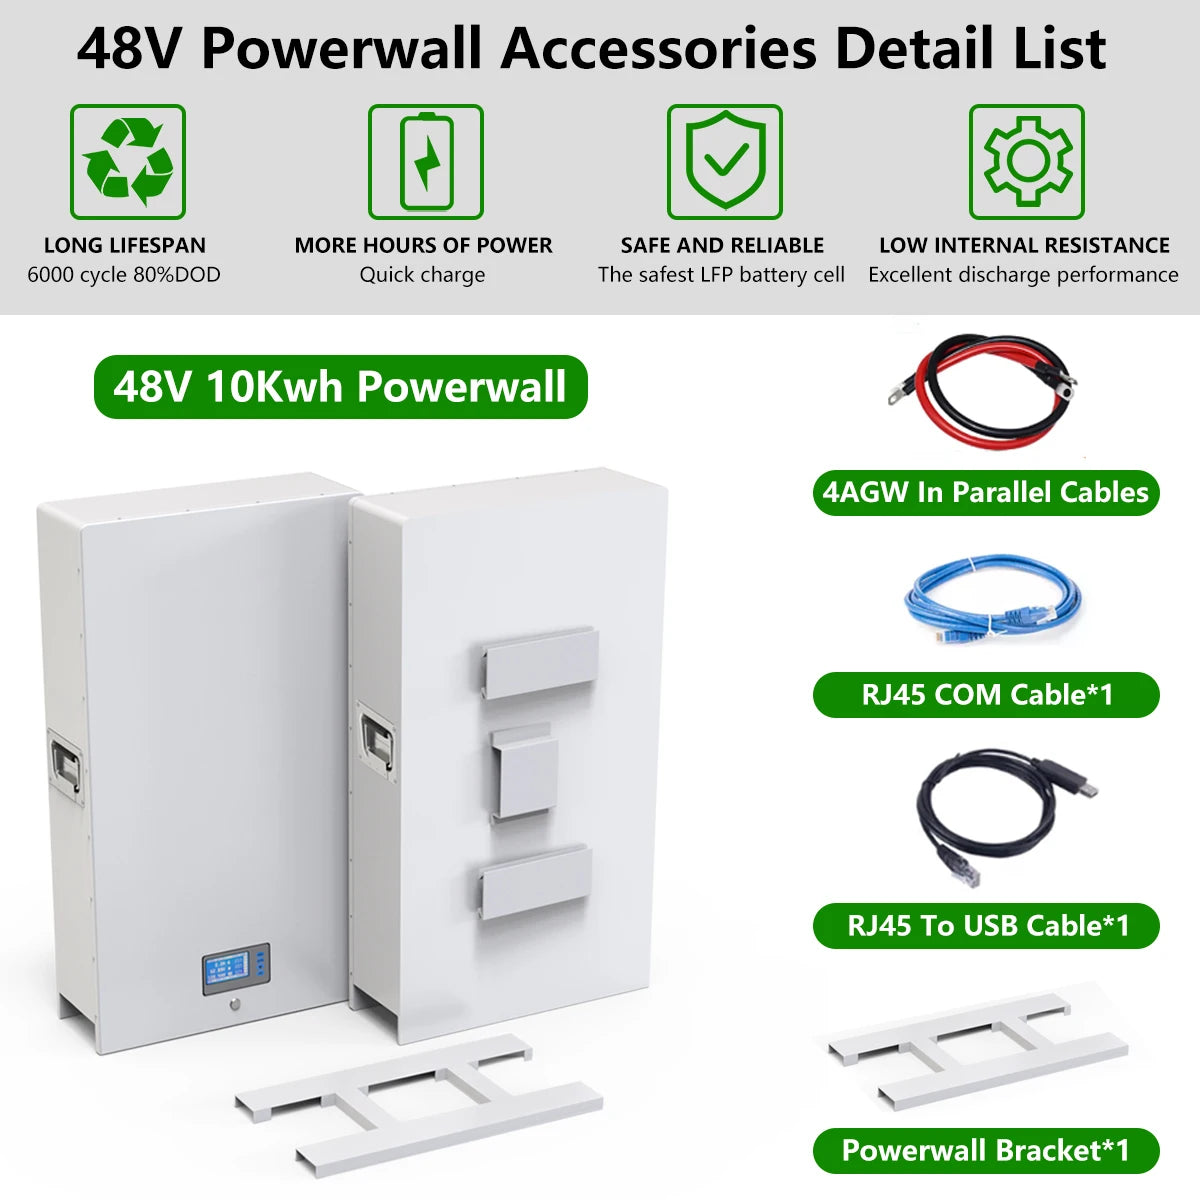 48V 200Ah 10Kw Powerwall, Powerwall accessory details, including lifespan, power density, and charging capabilities.